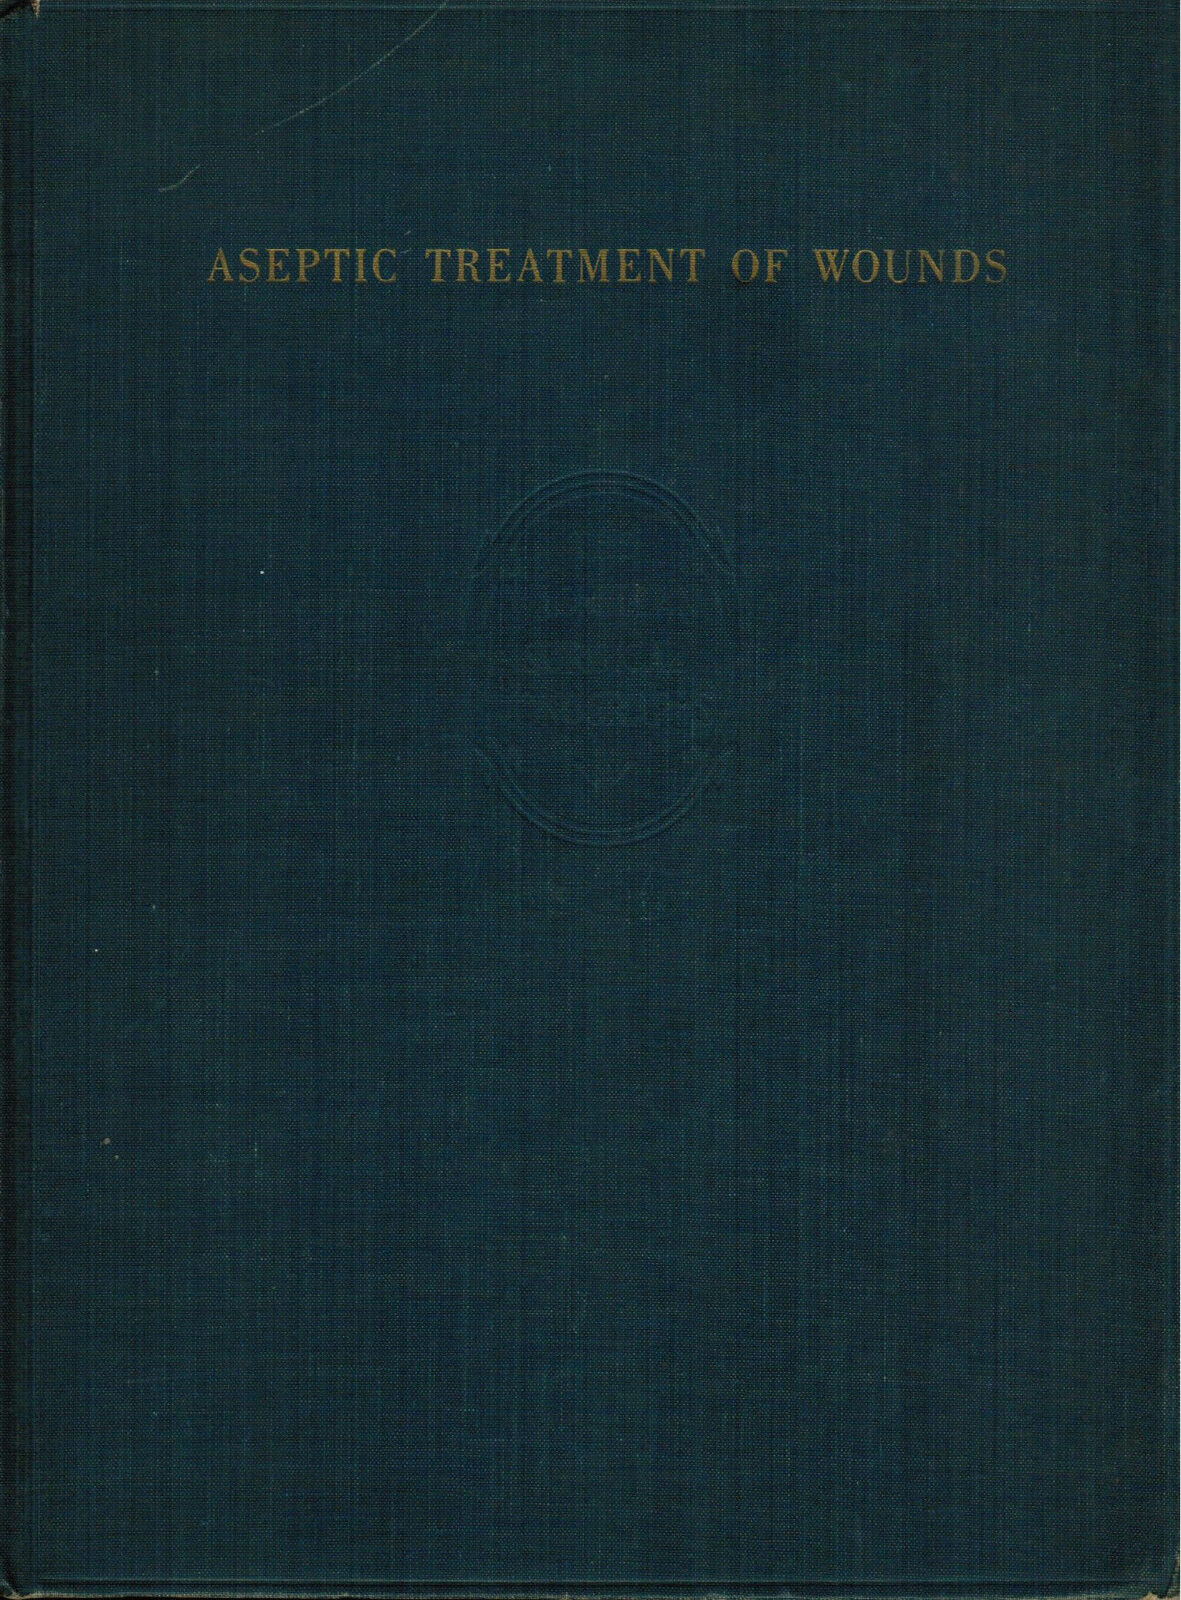 Aseptic Treatment of Wounds, Surgical Wounds Operations, Wound Infections, OR\'s